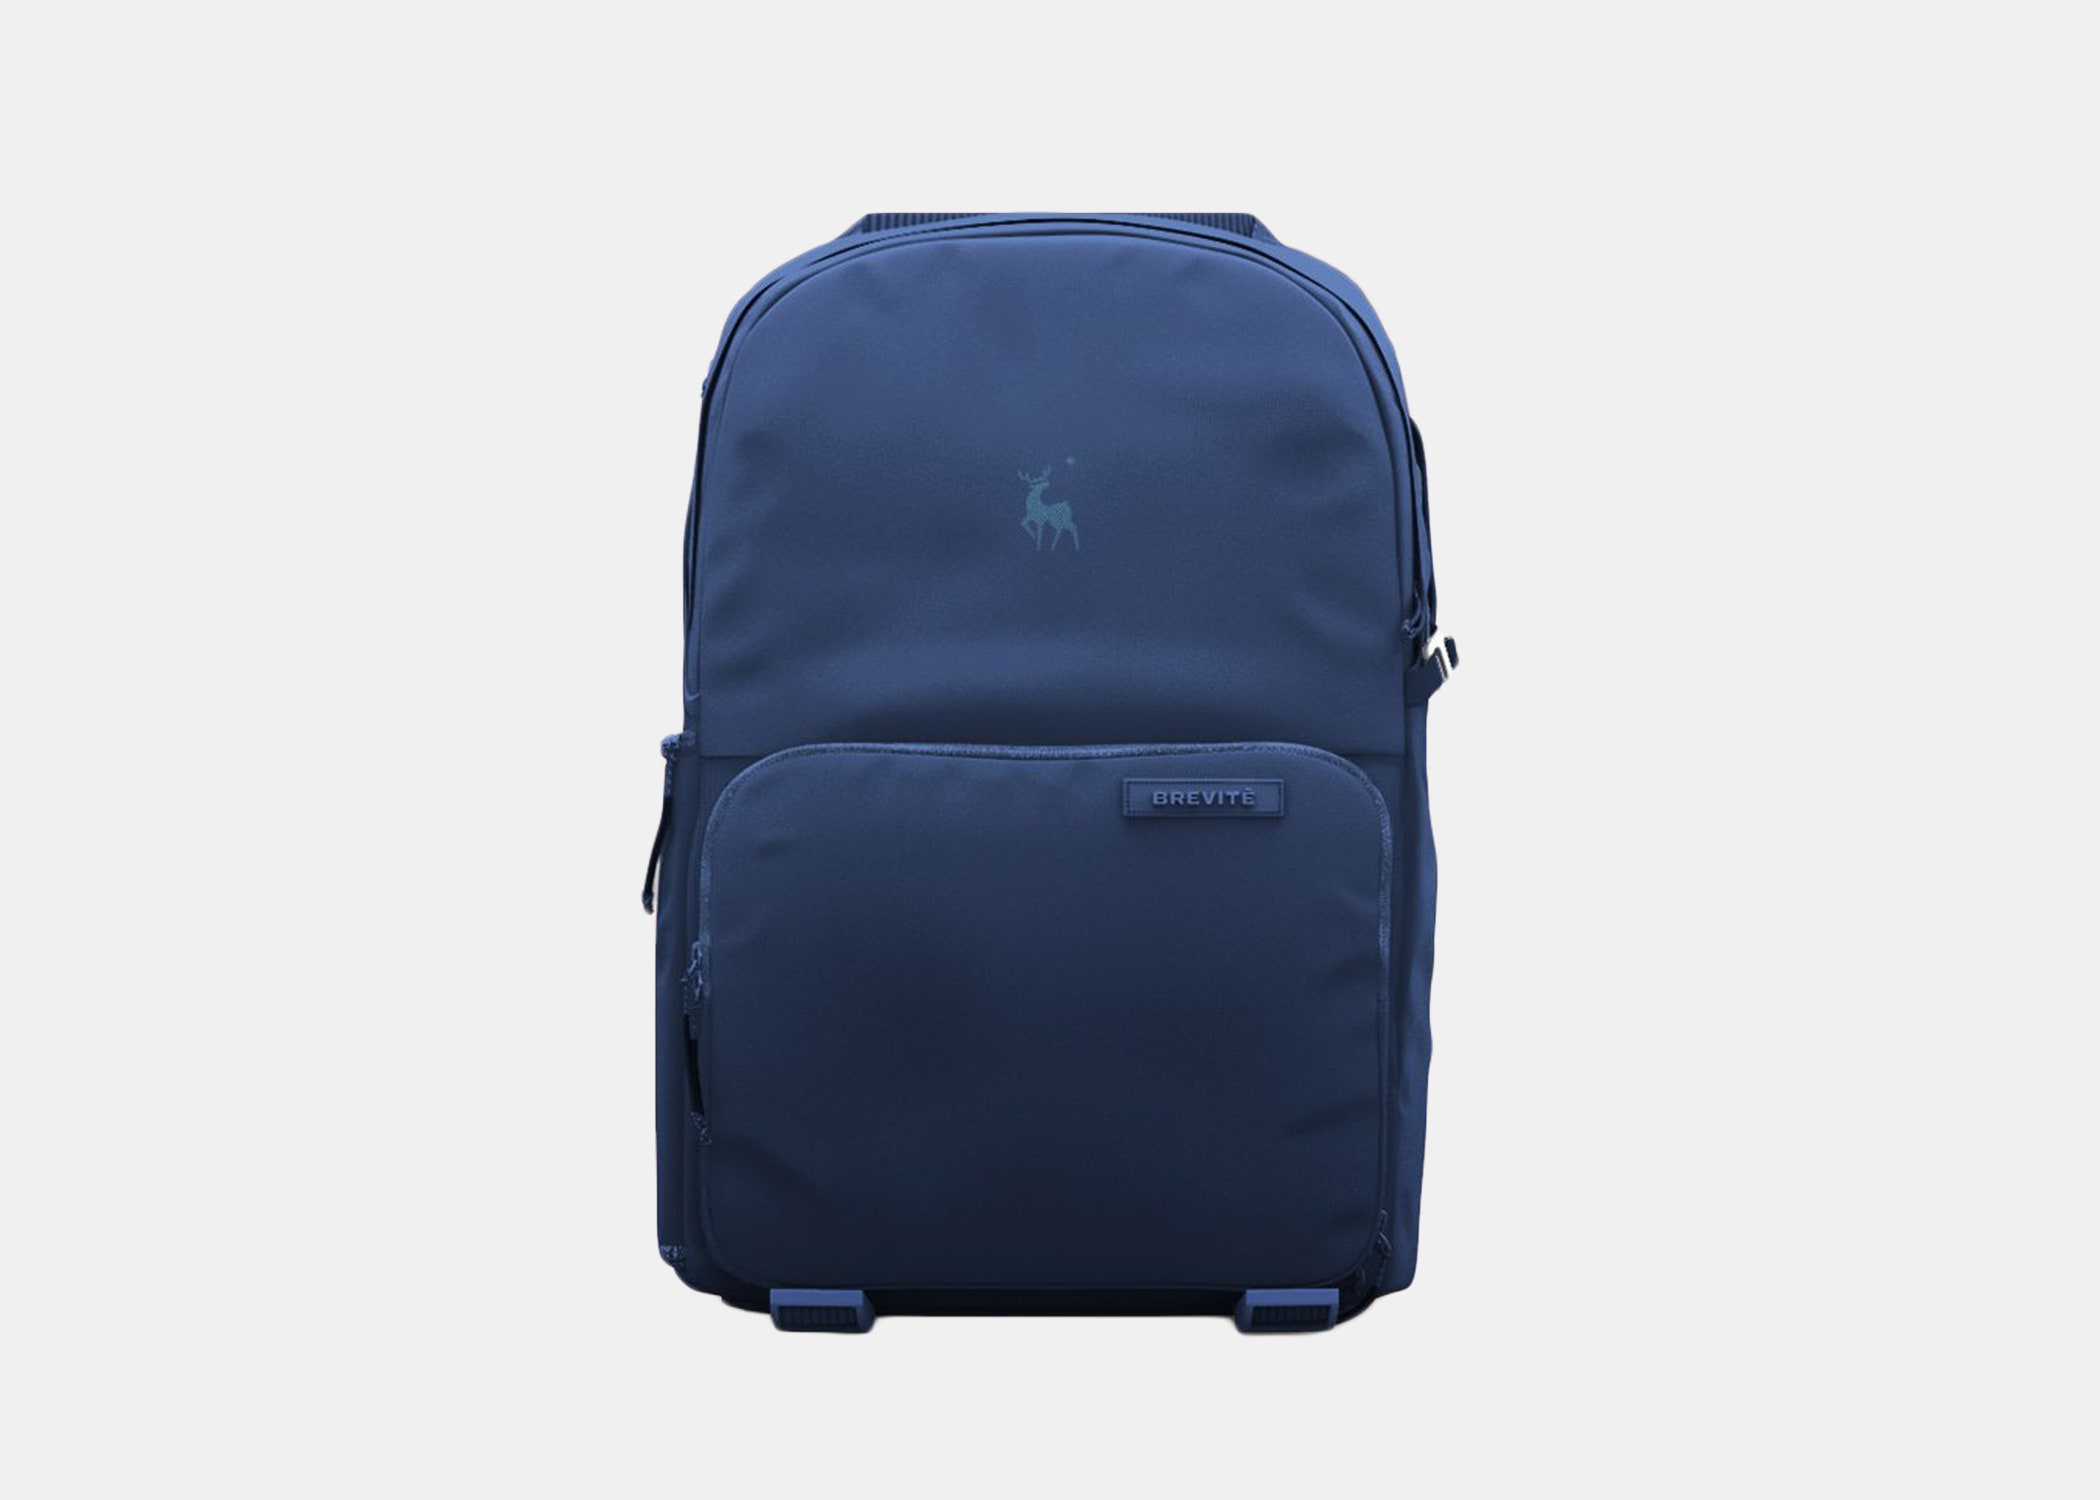 <p><strong>Best multi-purpose bag</strong></p> <p>Designed with shutterbugs in mind, Brevitē's The Jumper backpack has a pocket for each and every essential: there's a sleeve that fits up to a 16-inch laptop; a compartment with removable dividers, meant to hold a full-frame DSLR, three lenses, plus a 70-200mm lens or drone and SD cards; a smaller zip pocket to slide a passport and phone into; a water bottle holder; an open inner compartment to store a change of clothes; and loops on the bottom to tote a tripod. When you want to use it as a standard backpack, take the dividers out to have one large compartment inside. Consider this the personal item of choice for photographers.</p> <p><strong>Noteworthy features:</strong> Quick side access to camera, luggage pass-through sleeve to secure to carry-on</p> $170, Brevitē. <a href="https://brevite.co/collections/camera-backpacks/products/the-jumper?variant=31059609288756">Get it now!</a><p>Sign up to receive the latest news, expert tips, and inspiration on all things travel</p><a href="https://www.cntraveler.com/newsletter/the-daily?sourceCode=msnsend">Inspire Me</a>